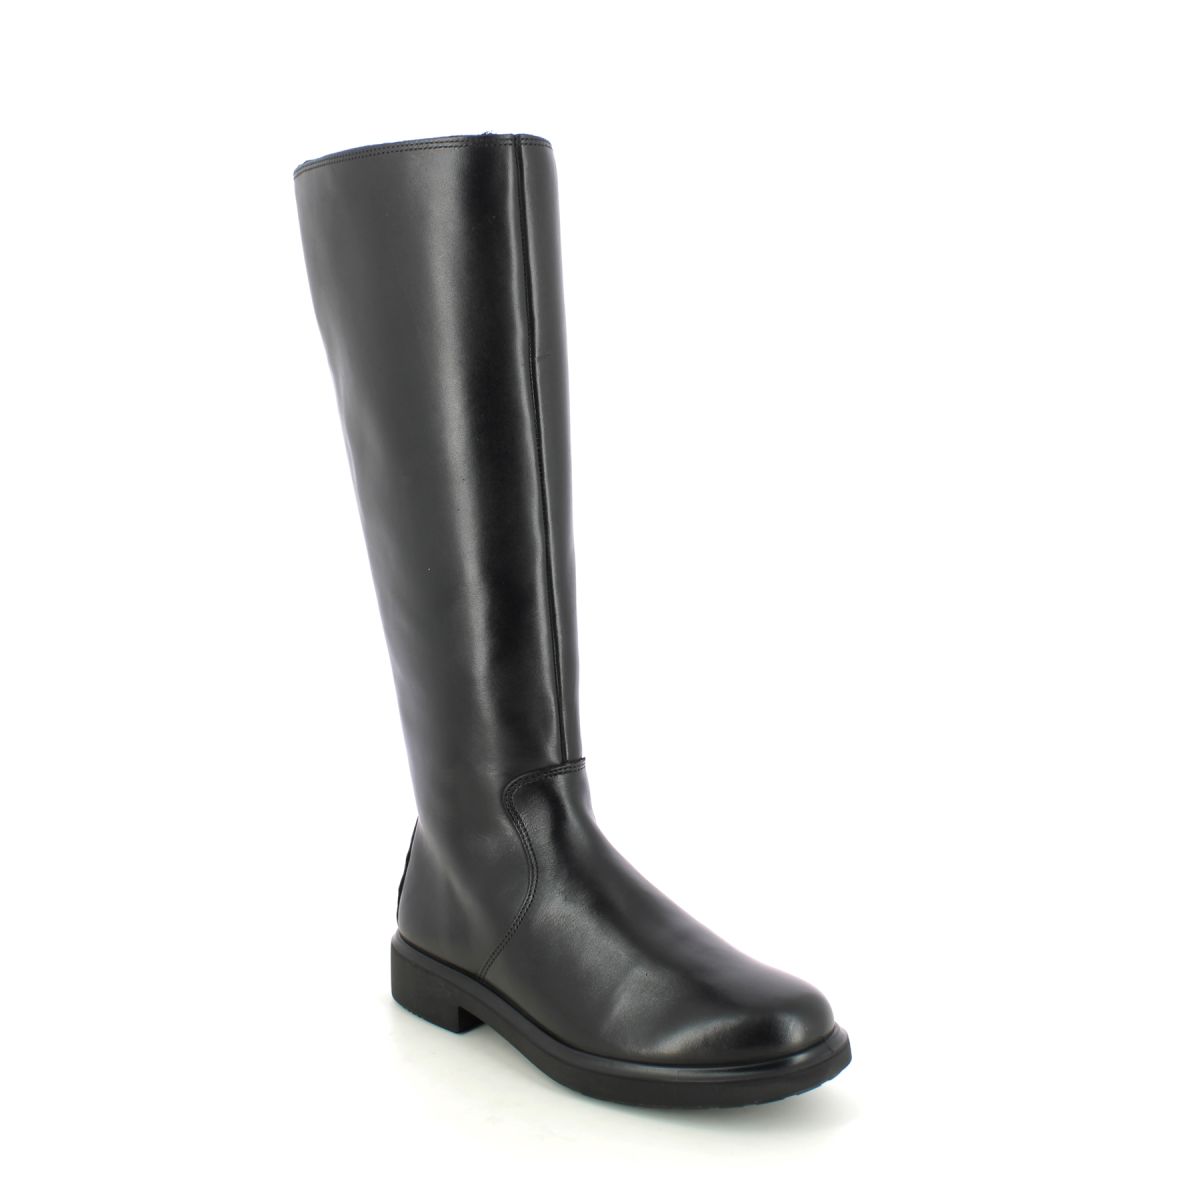 Ecco Amsterdam Metropole Tex Black Leather Womens Knee-High Boots 222023-01001 In Size 40 In Plain Black Leather